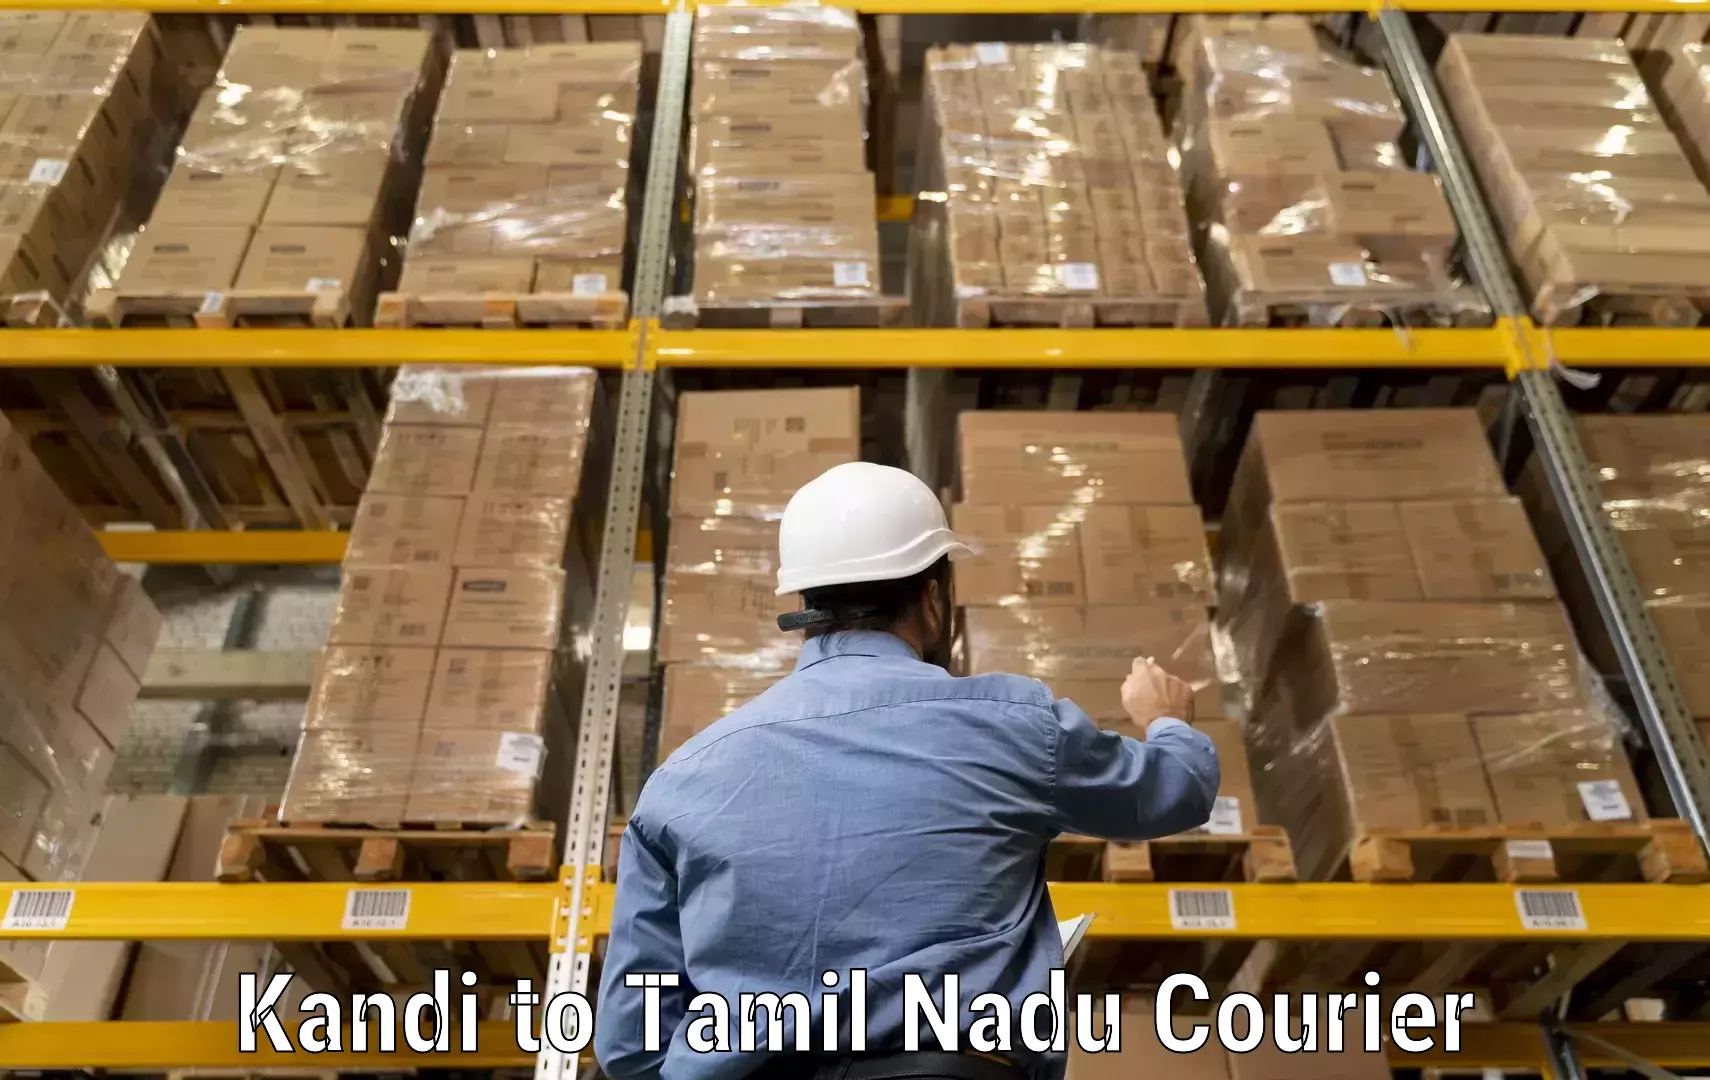 Speedy delivery service Kandi to Omalur